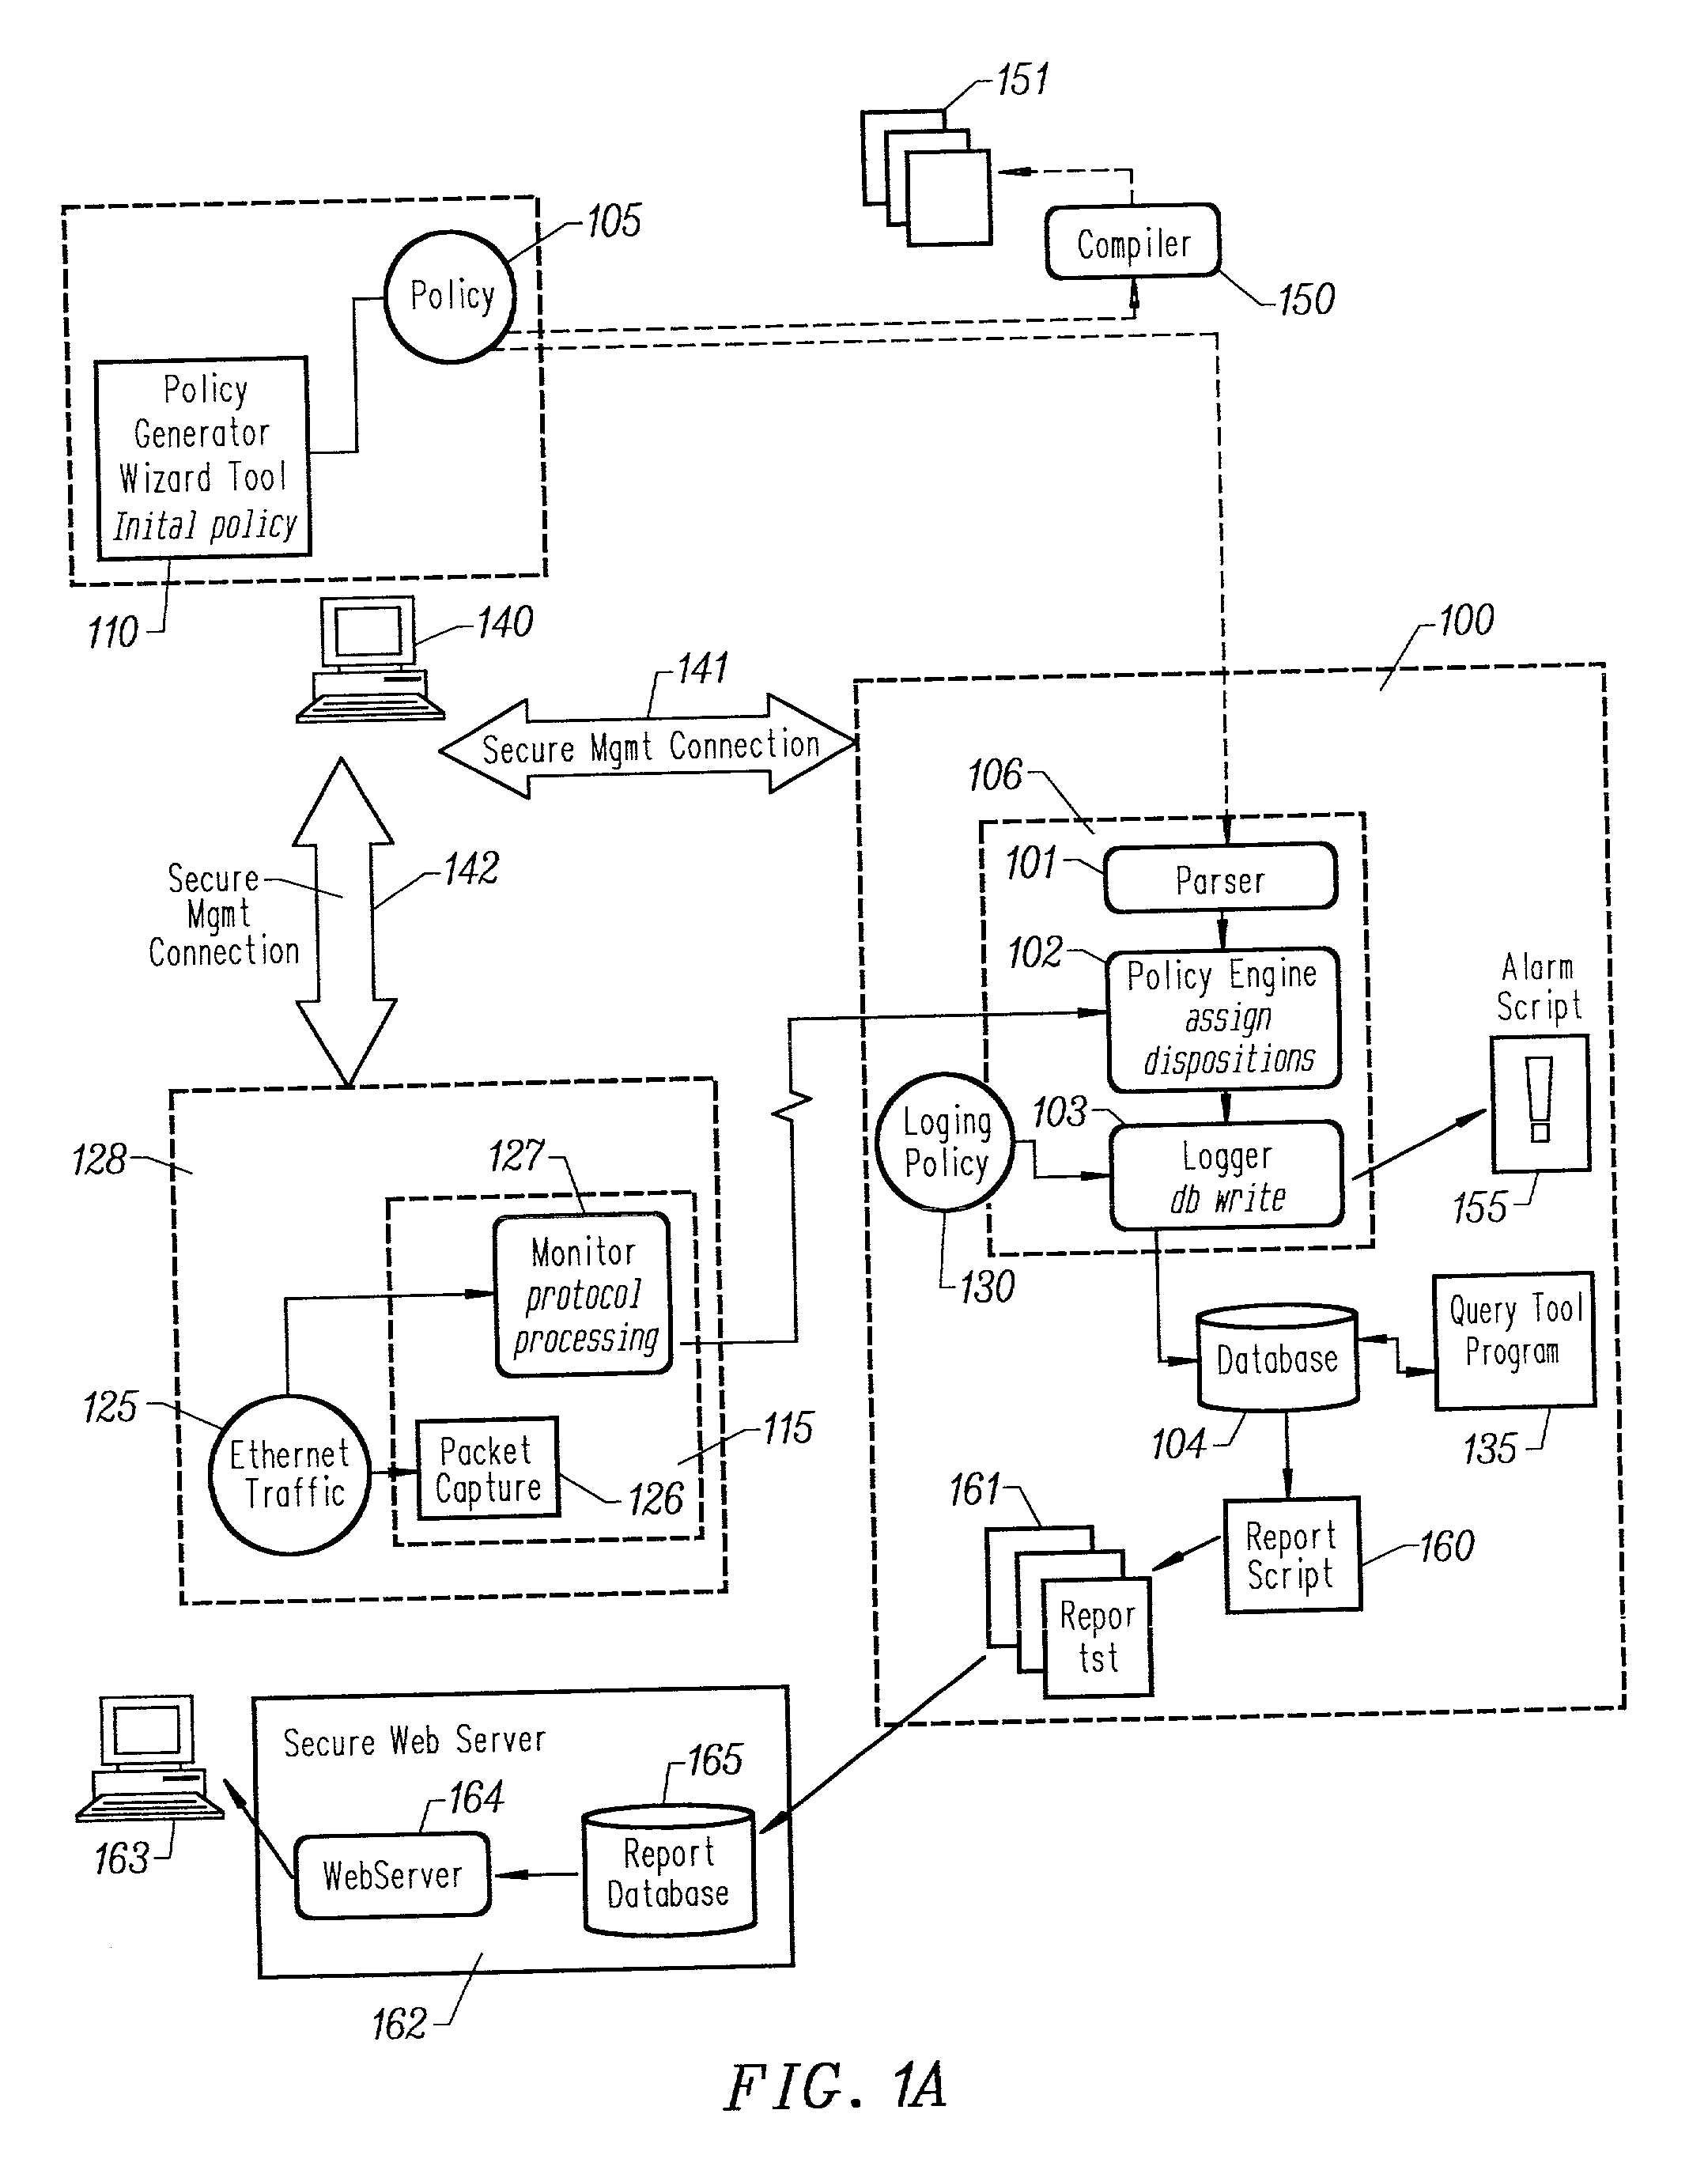 Automated generation of an english language representation of a formal network security policy